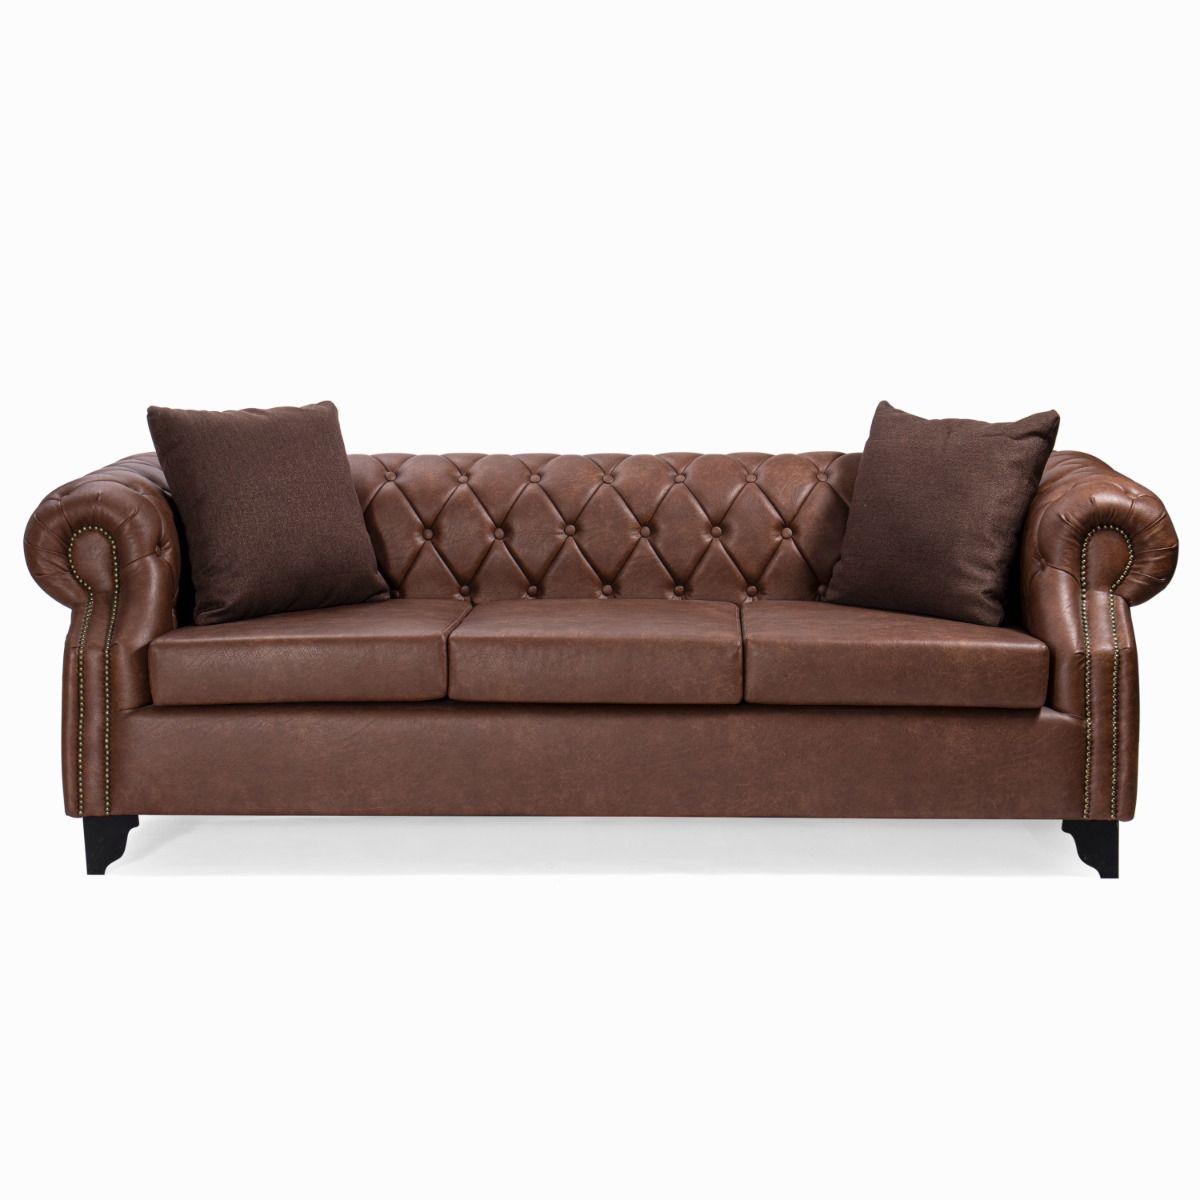 Where To Buy A Chesterfield Sofa